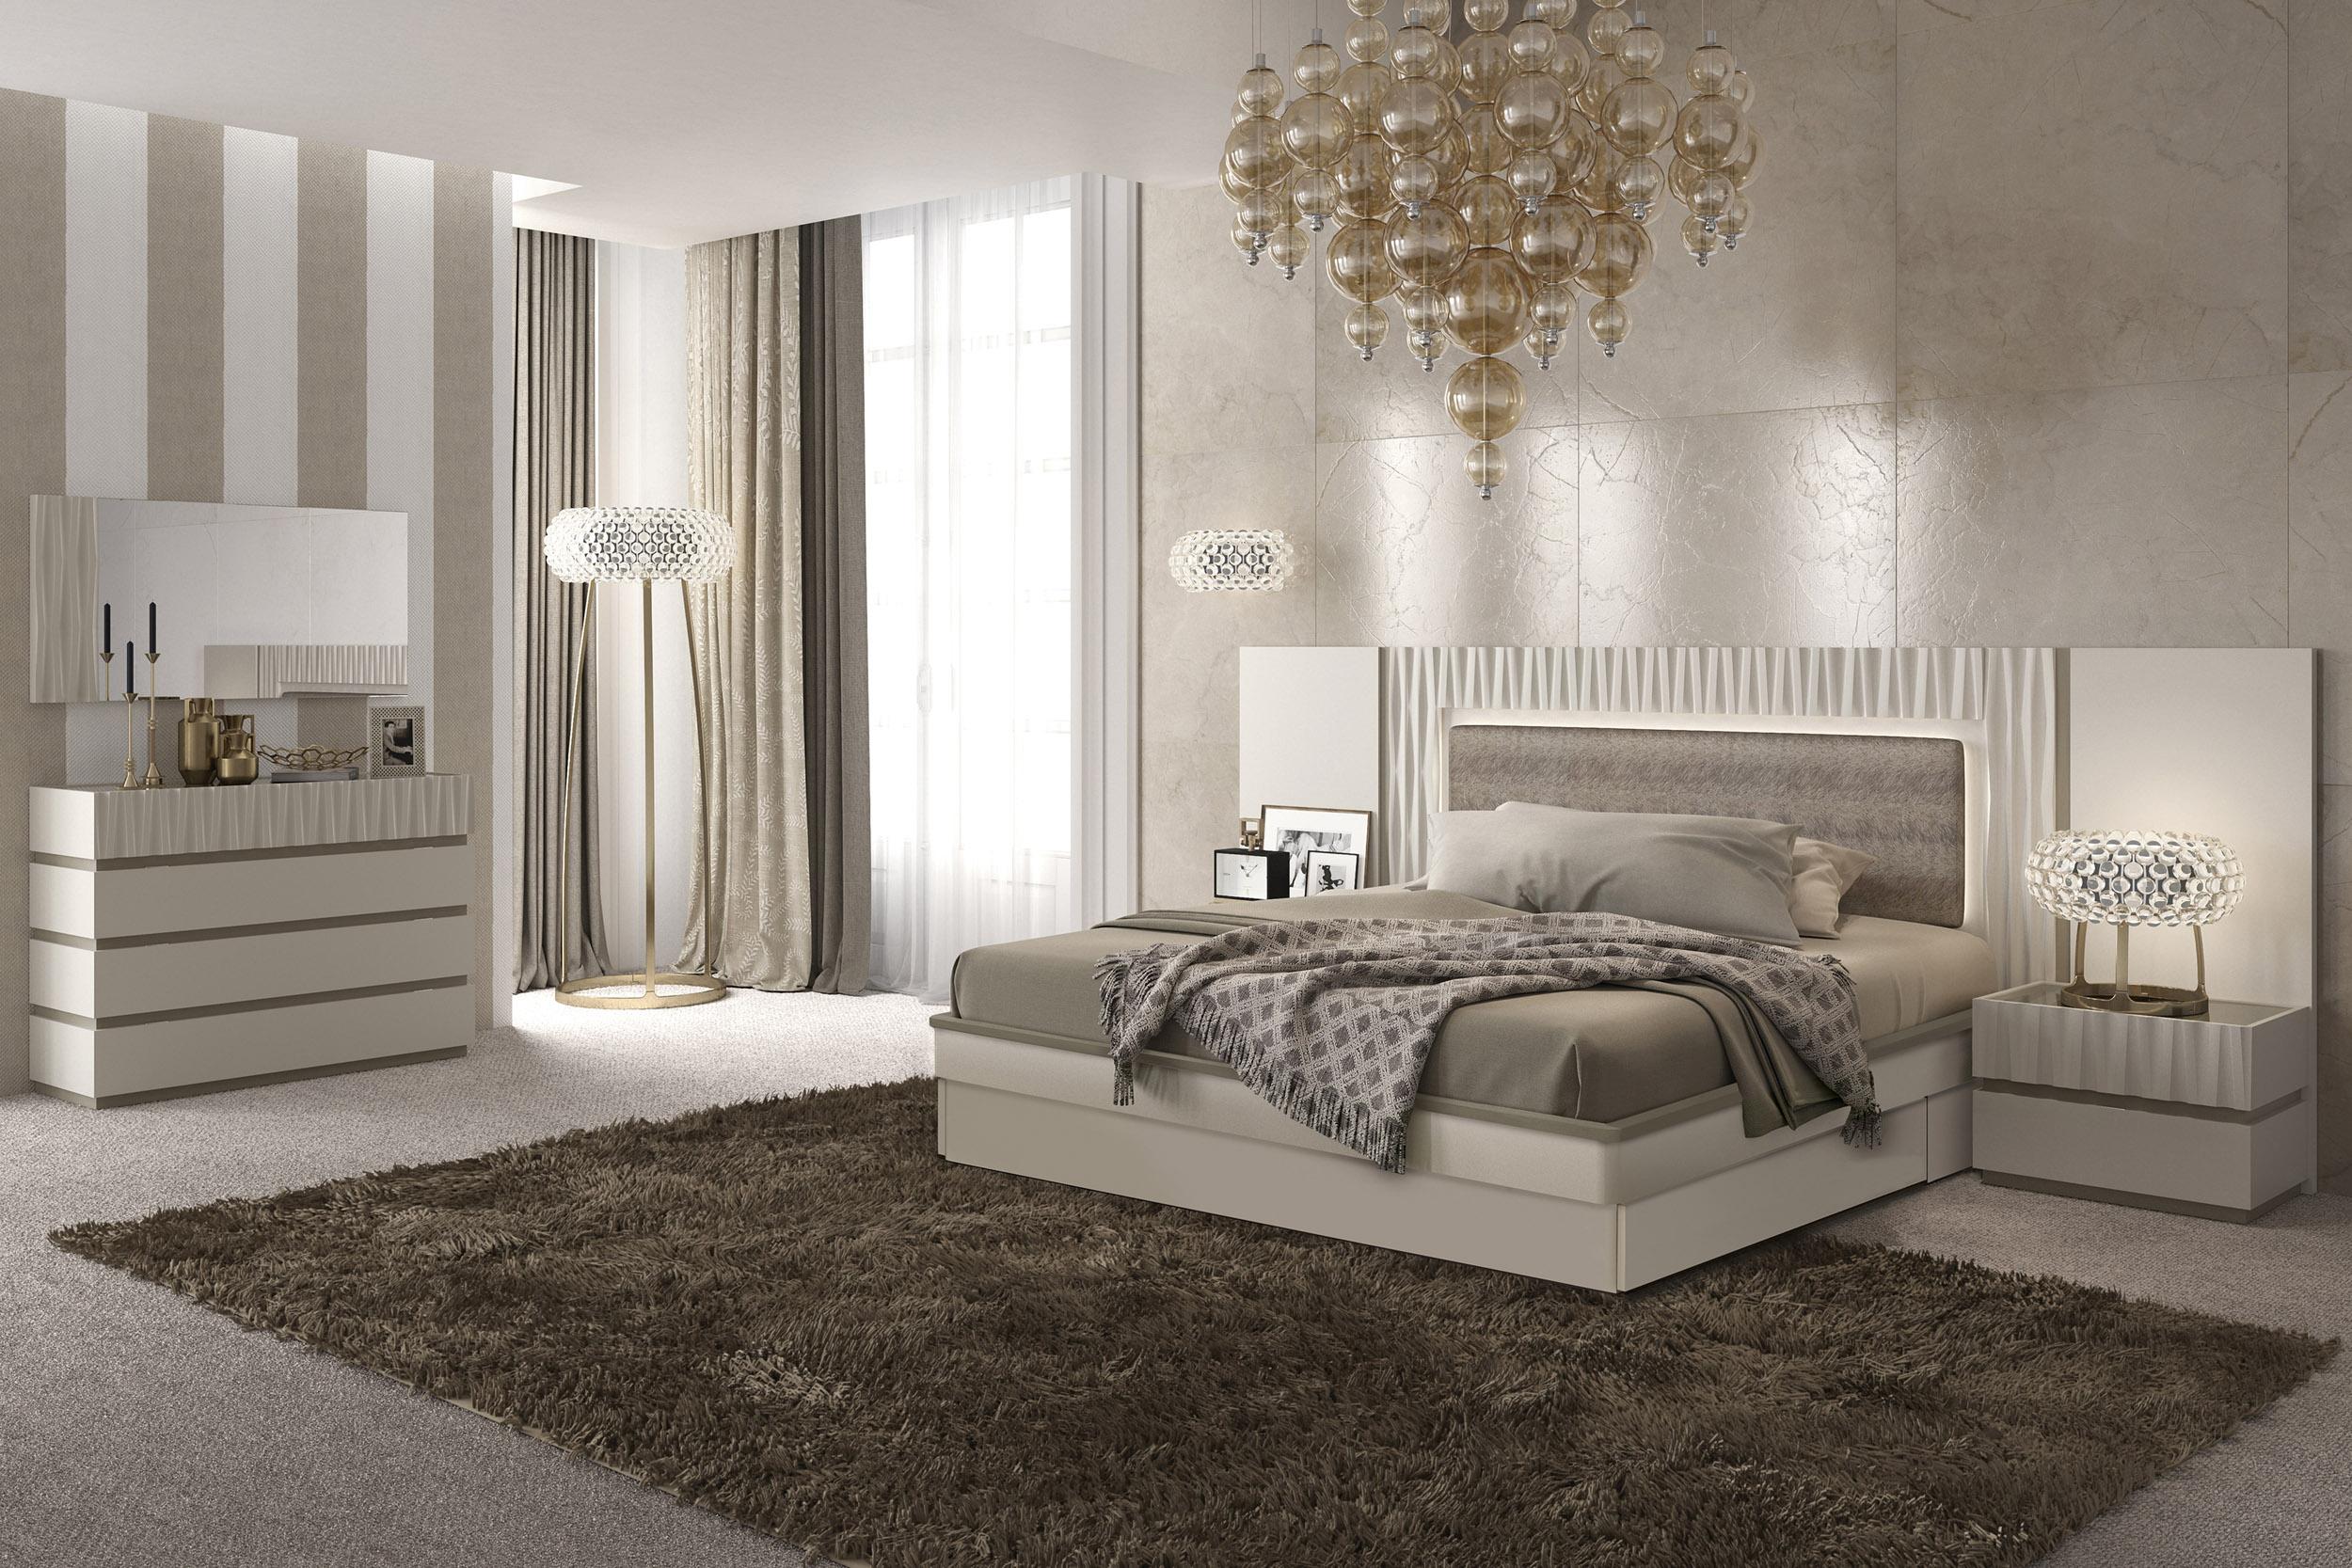 Exclusive Quality Modern Contemporary Bedroom Designs with Light System St. Paul Minnesota ESF